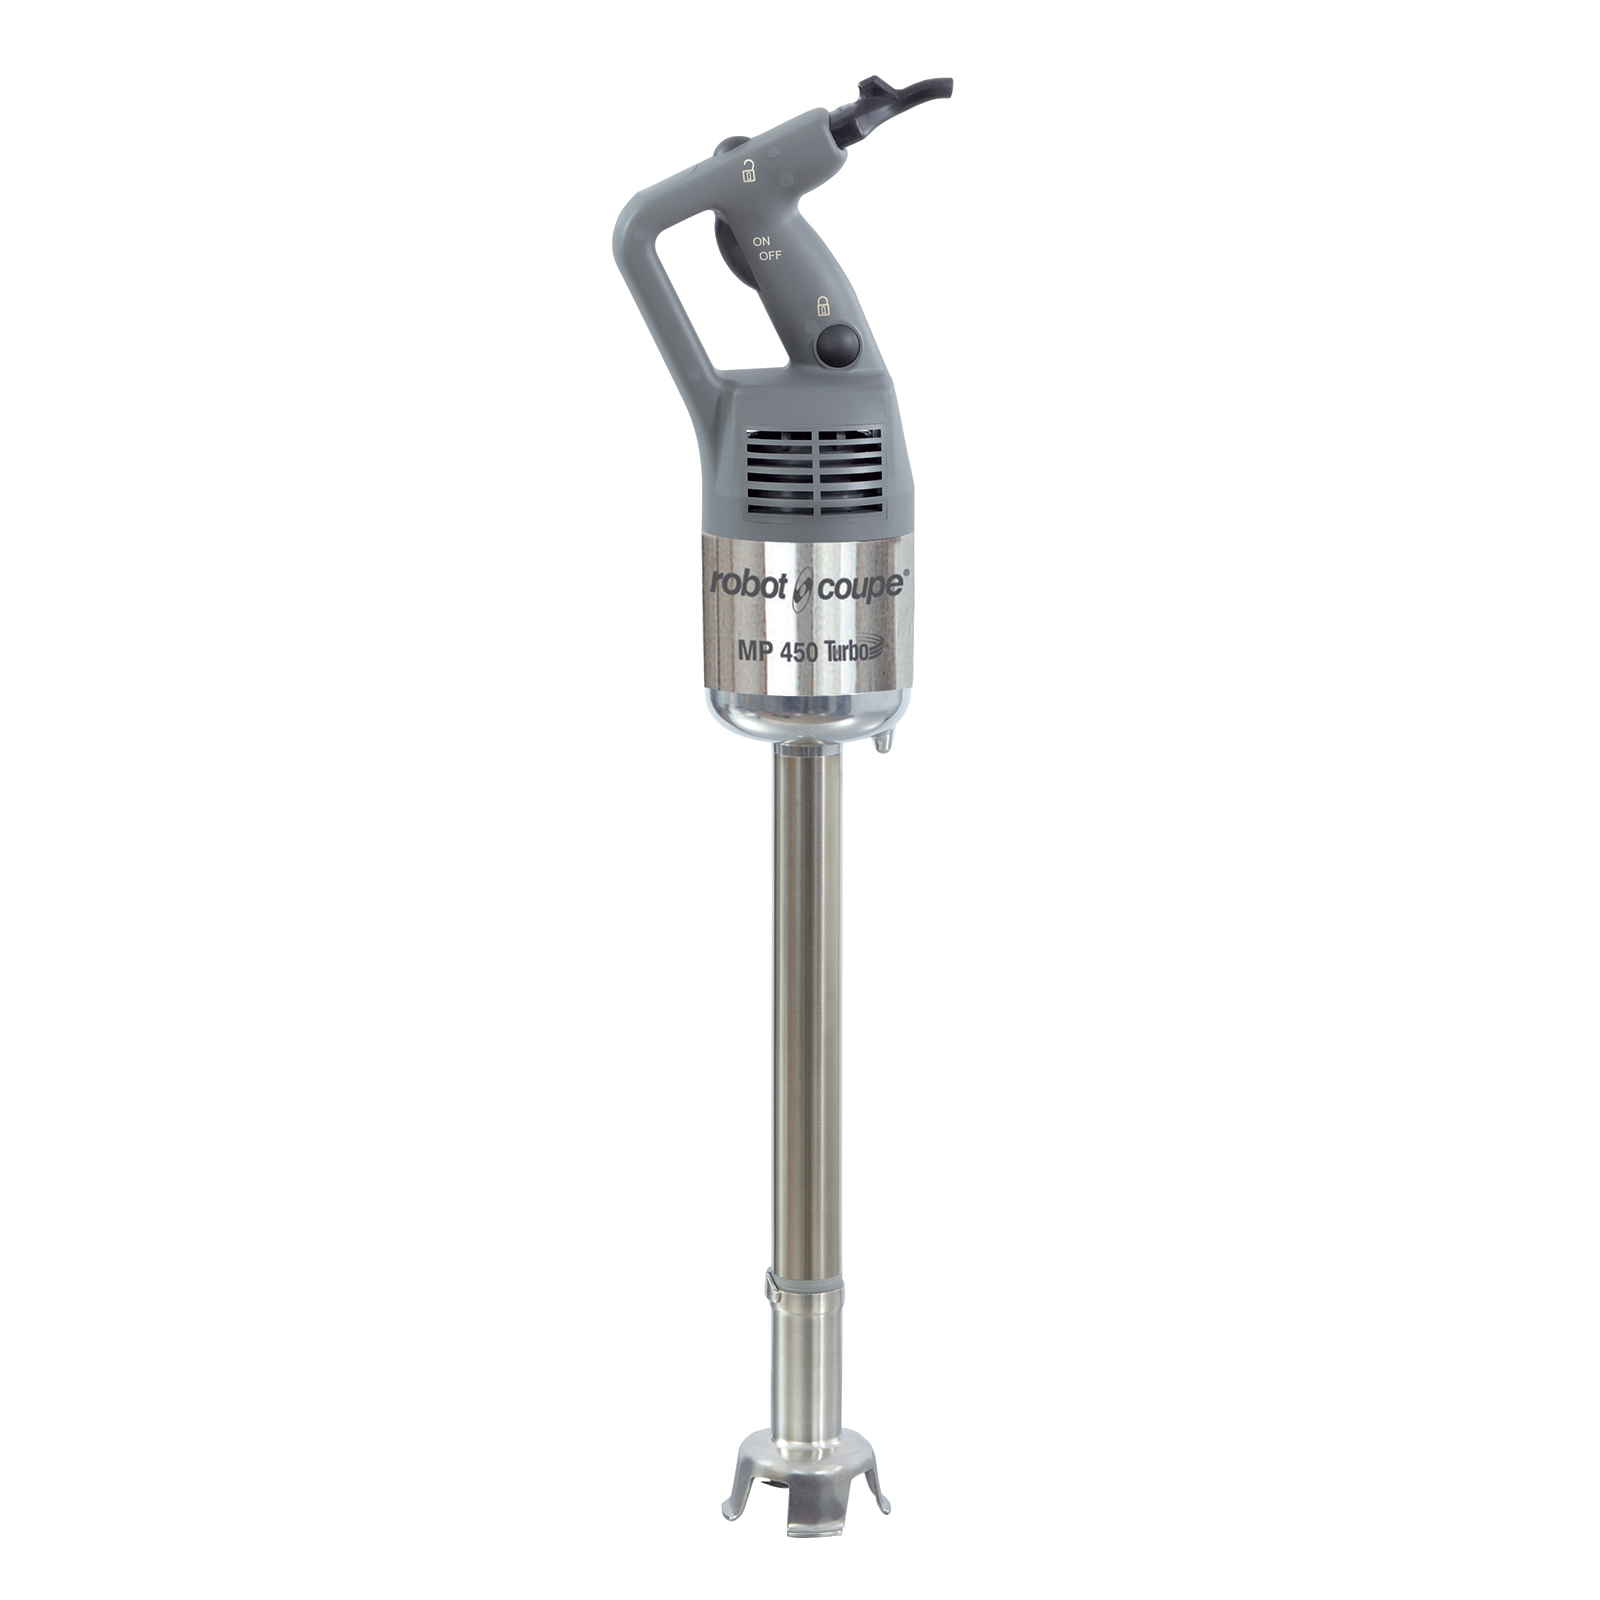 Commercial Power Mixer, hand
held, 18&quot; stainless steel
shaft, removable stainless
steel foot &amp; blade, includes:
(1) stainless steel wall
support &amp; (1) blade
disassembly tool, 100 liter
processing capacity, automatic
single speed 12,000 RPM, 1.1
HP, 120v/60/1-ph, 6.0 amps,
720 watts, NEMA 5-15P, &quot;Easy
plug&quot; system with detachable
power cord, cETLus,
ETL-Sanitation PROMO 730